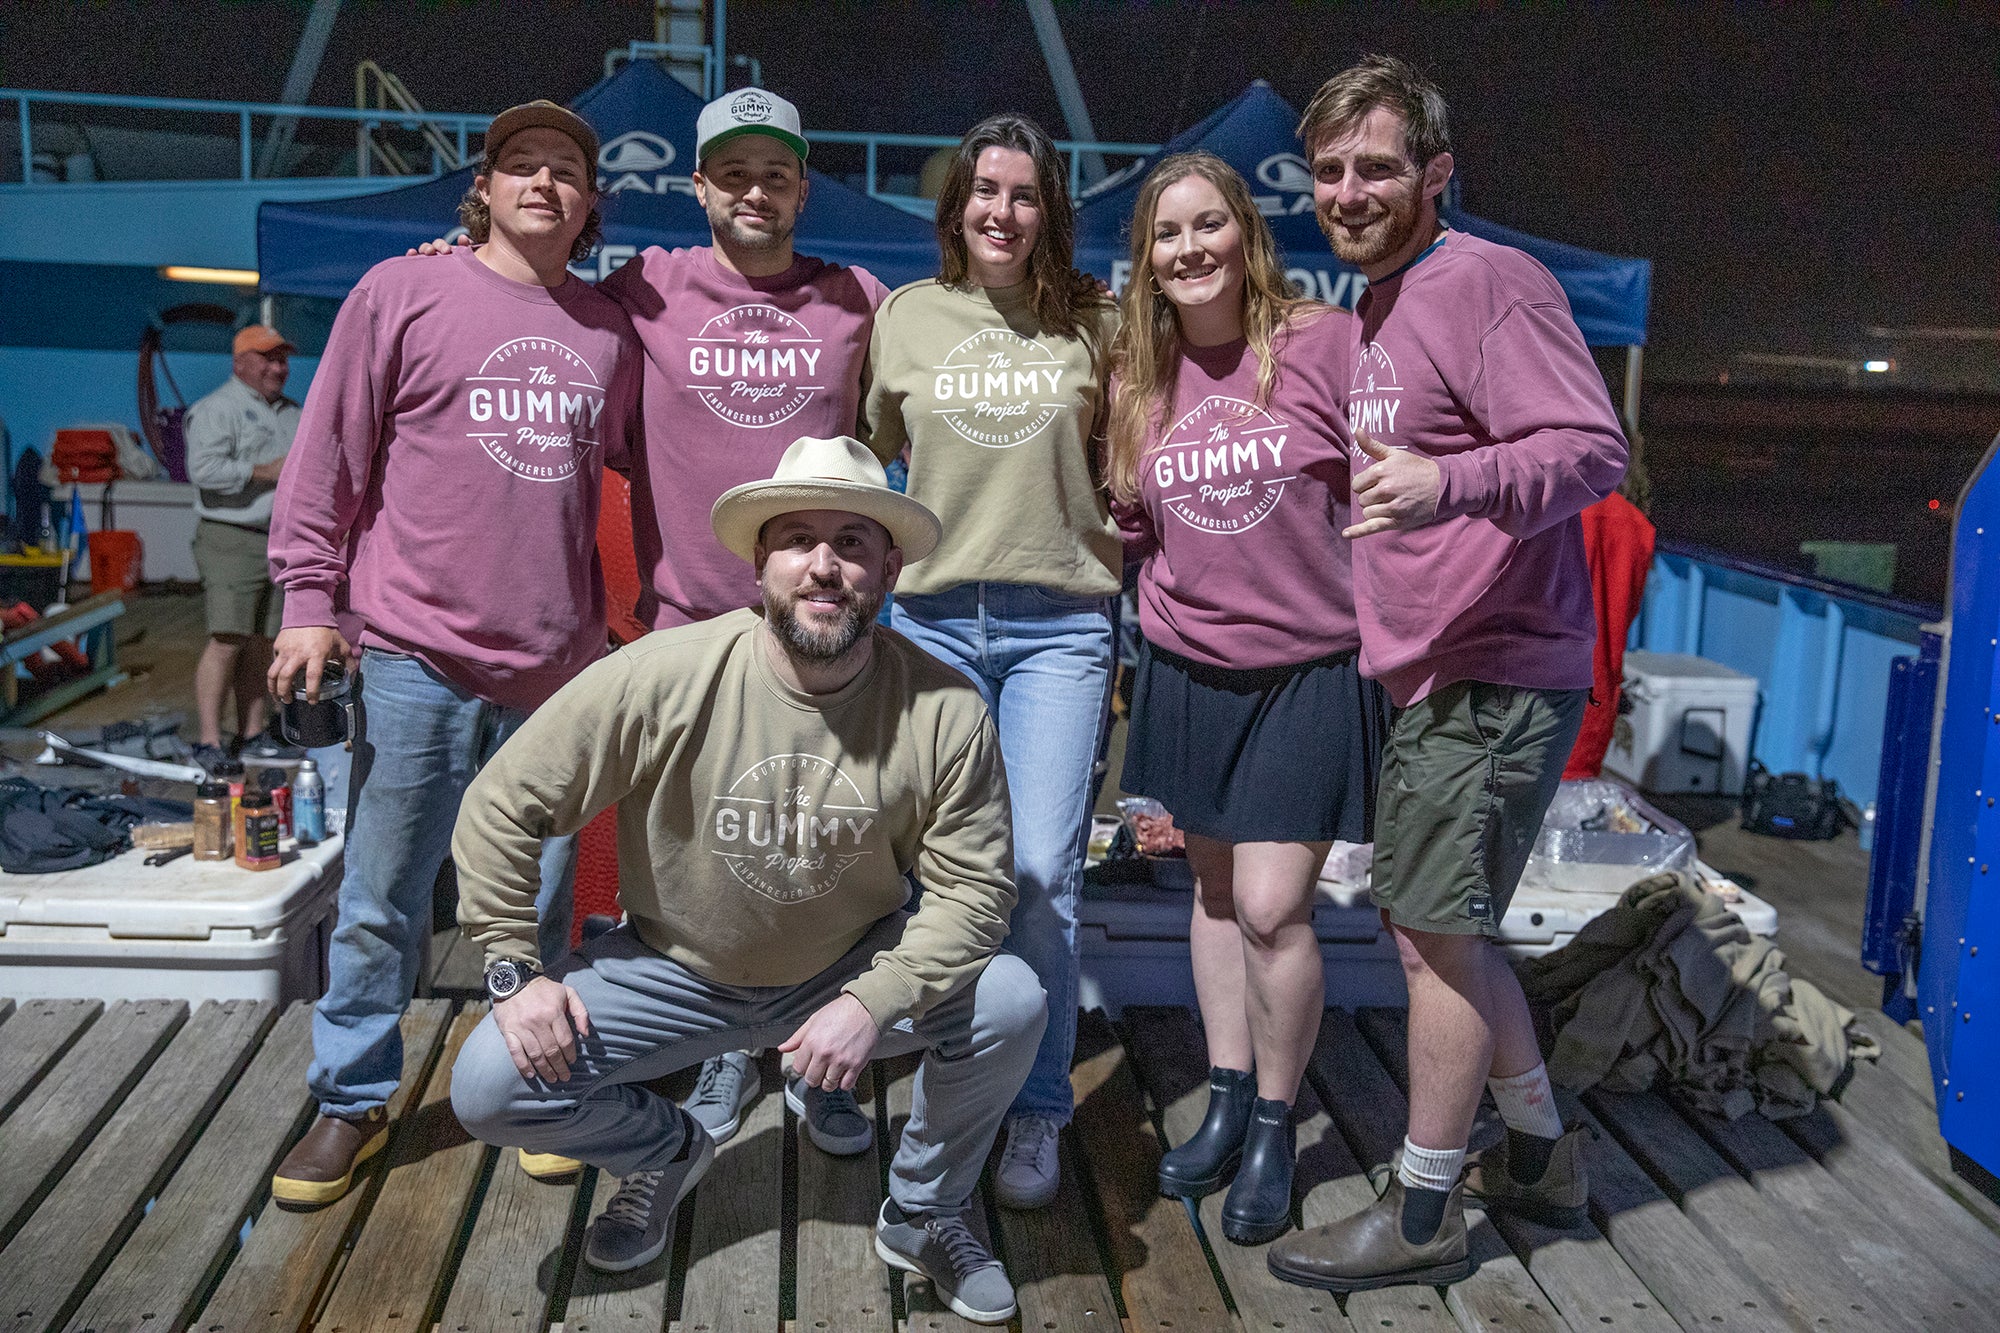 POTENT VENTURES ESTABLISHES PARTNERSHIP WITH LEADING SHARK CONSERVATION GROUP “OCEARCH” IN PREPARATION FOR LAUNCH OF THE GUMMY PROJECT